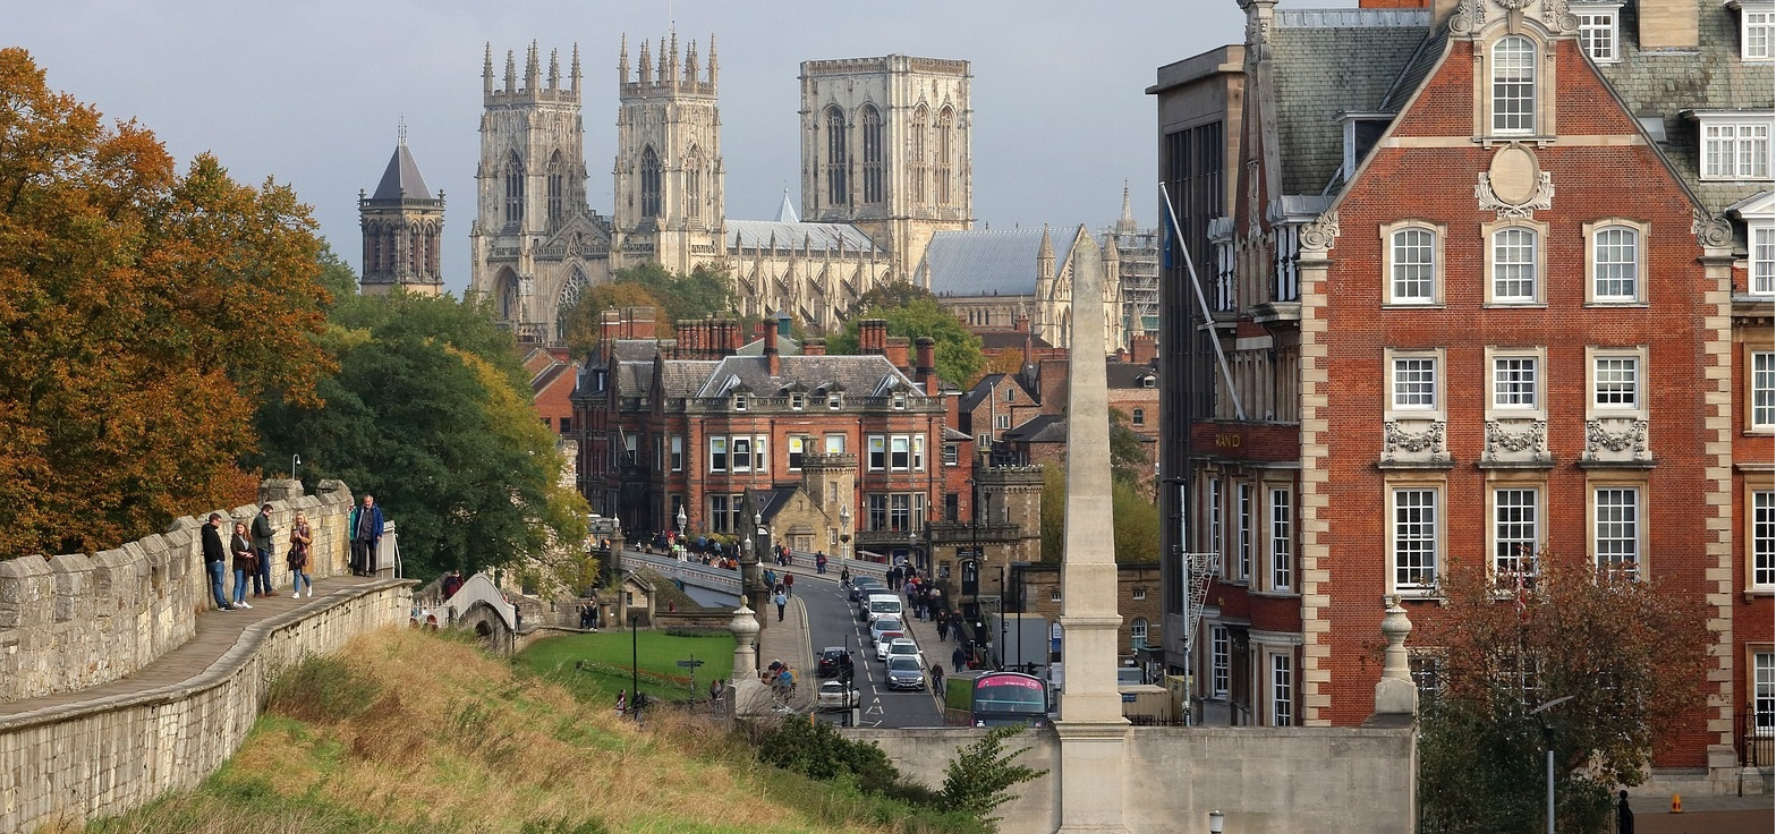 An image of the city of York, home to the Rowntree family. The picture shows the city walls and Minster.